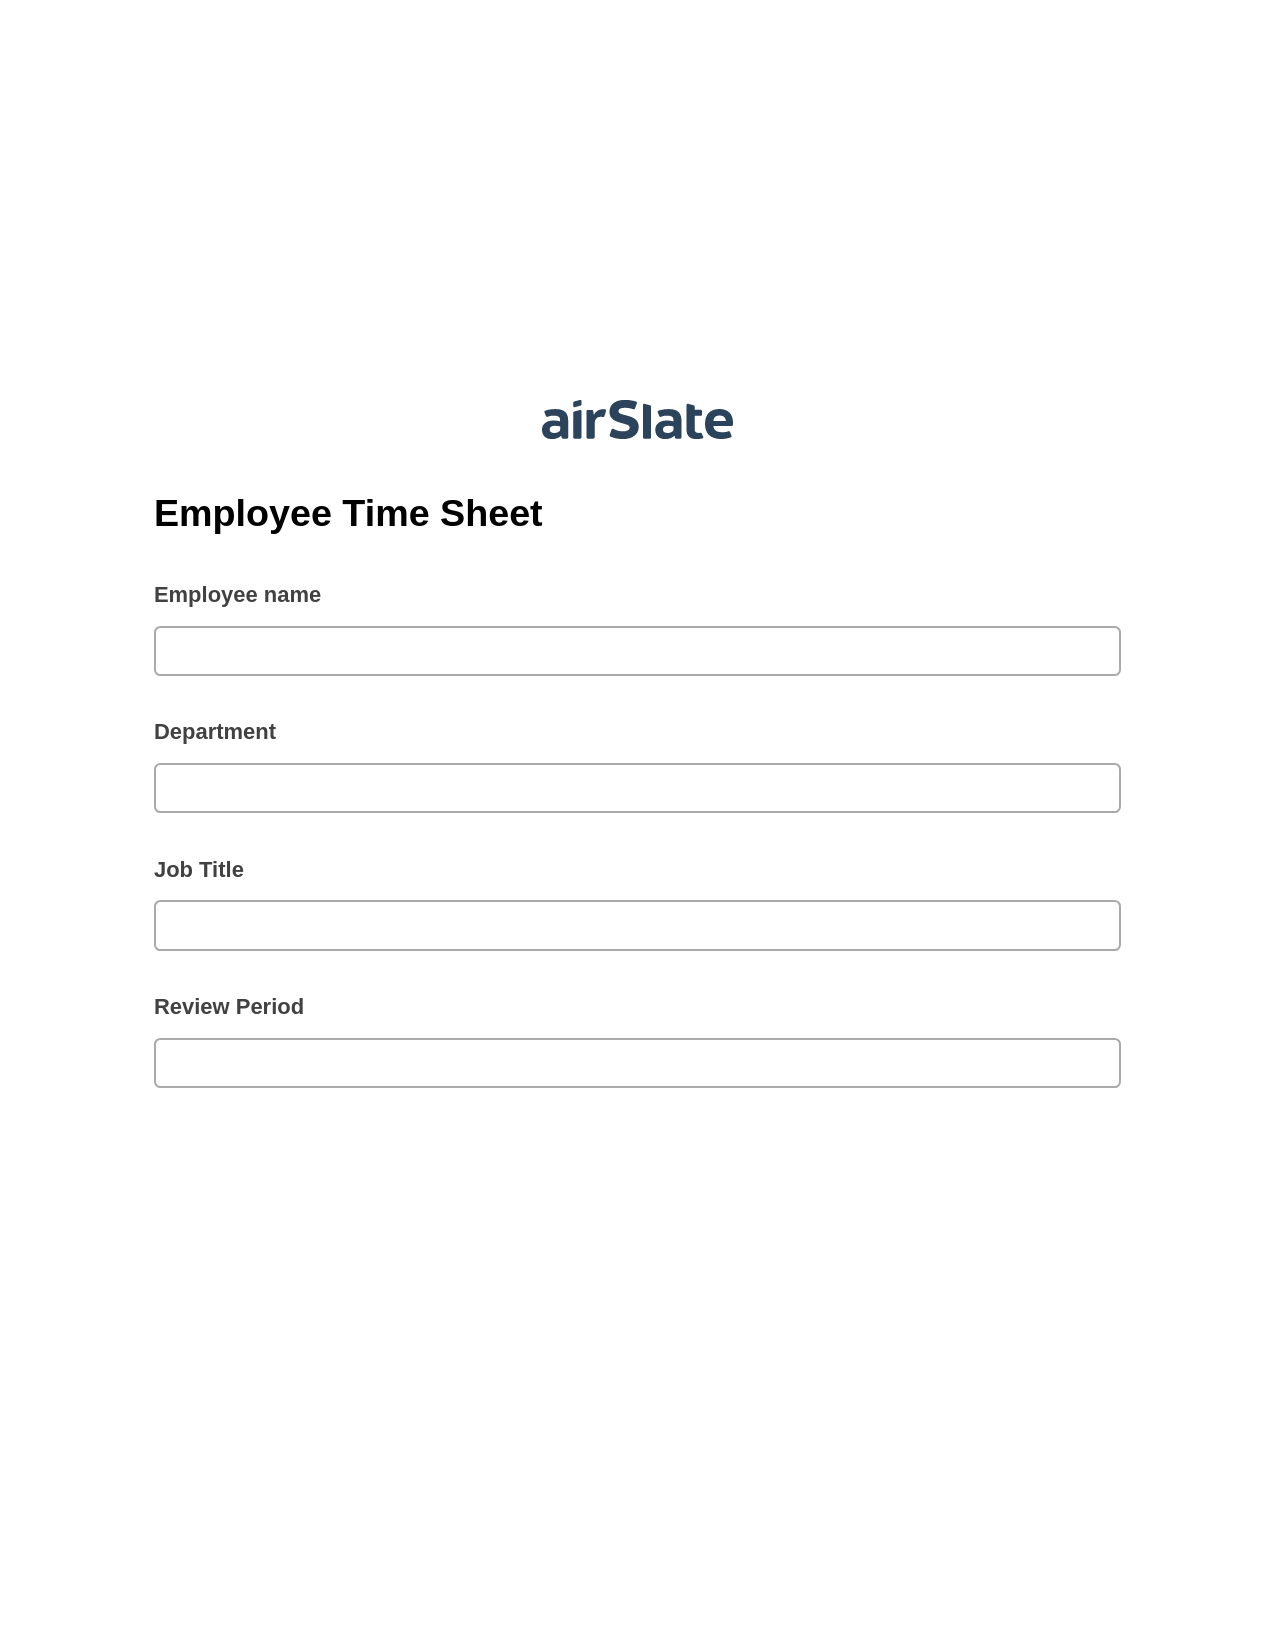 Employee Time Sheet Pre-fill from another Slate Bot, Update Audit Trail Bot, Archive to Dropbox Bot